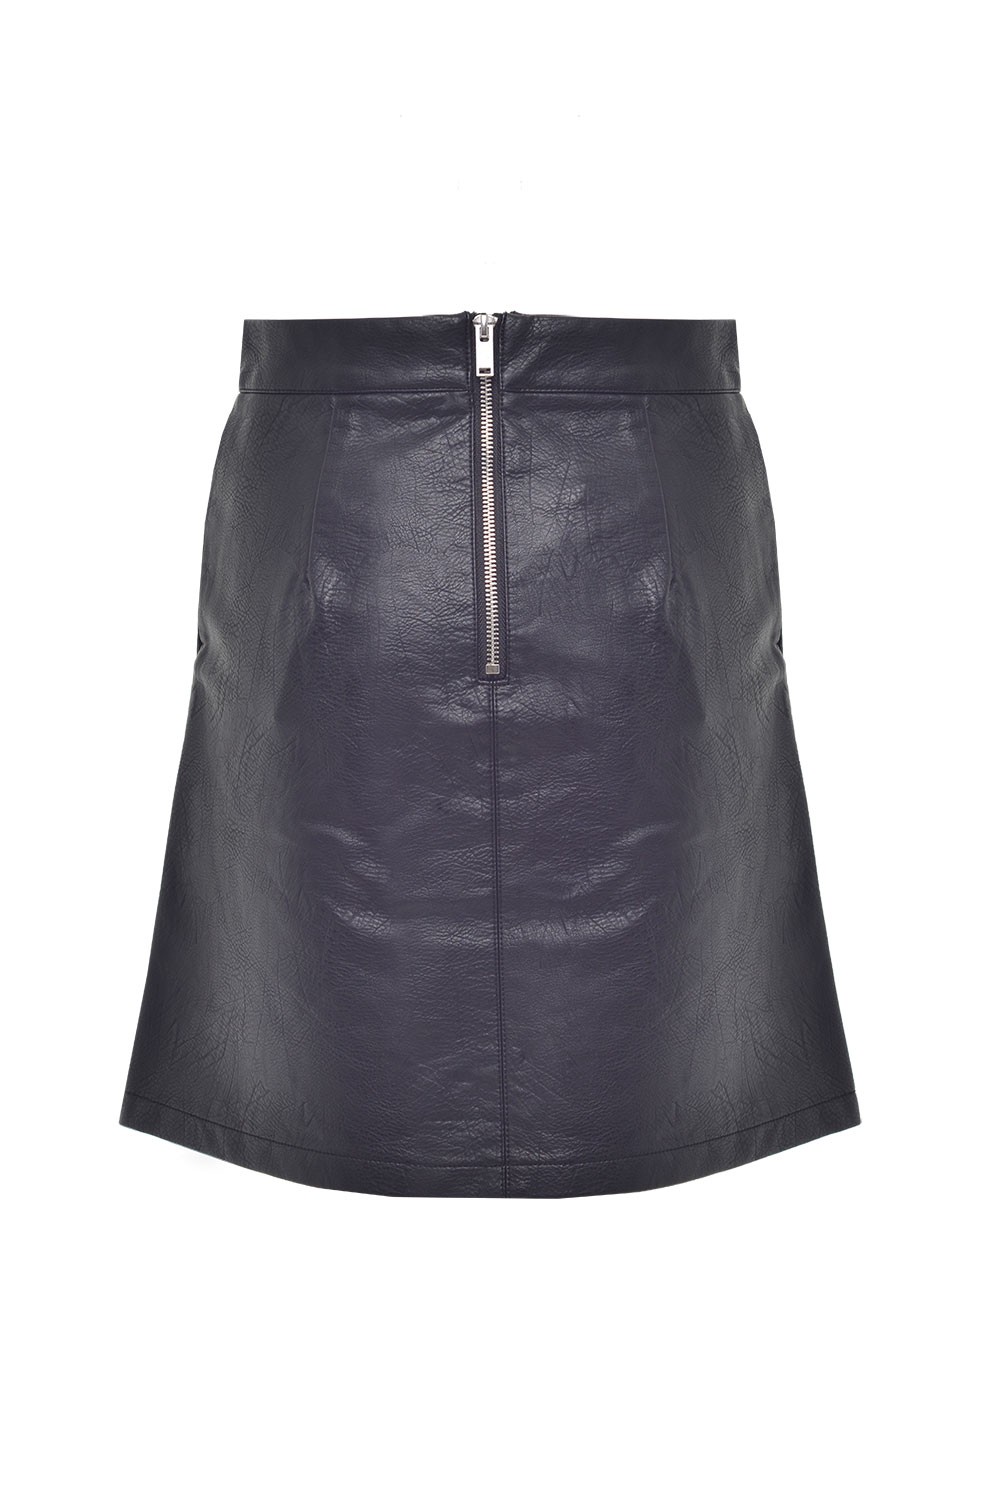 Only Lisa Faux Leather Skirt in Black | iCLOTHING